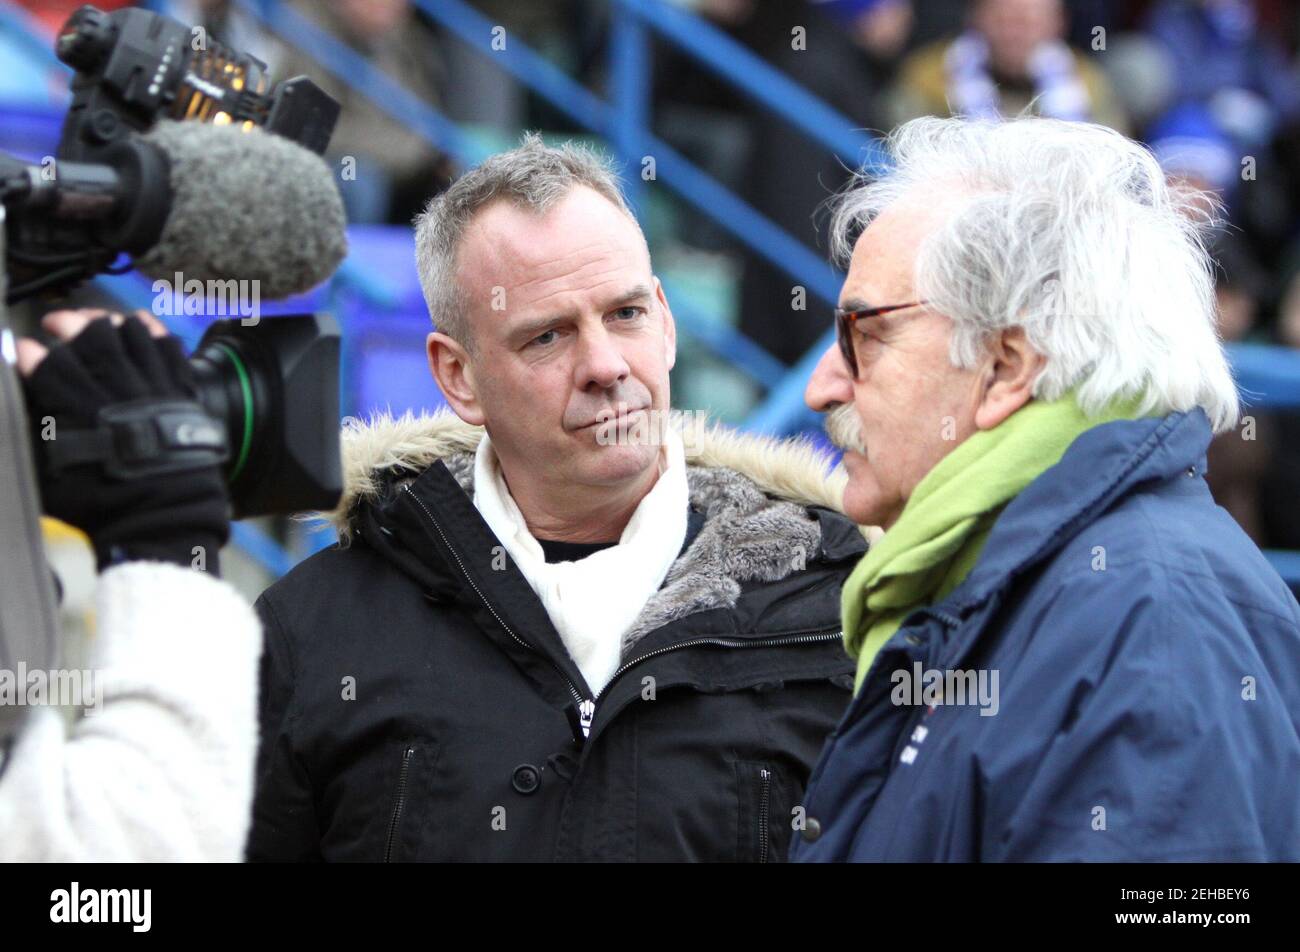 Football - Brighton & Hove Albion v Norwich City - Coca-Cola Football League One - Withdean Stadium Brighton - 09/10 - 13/2/10  Des Lynam and Norman Cook (aka Fat Boy Slim)   Mandatory Credit: Action Images / Paul Hazlewood Stock Photo